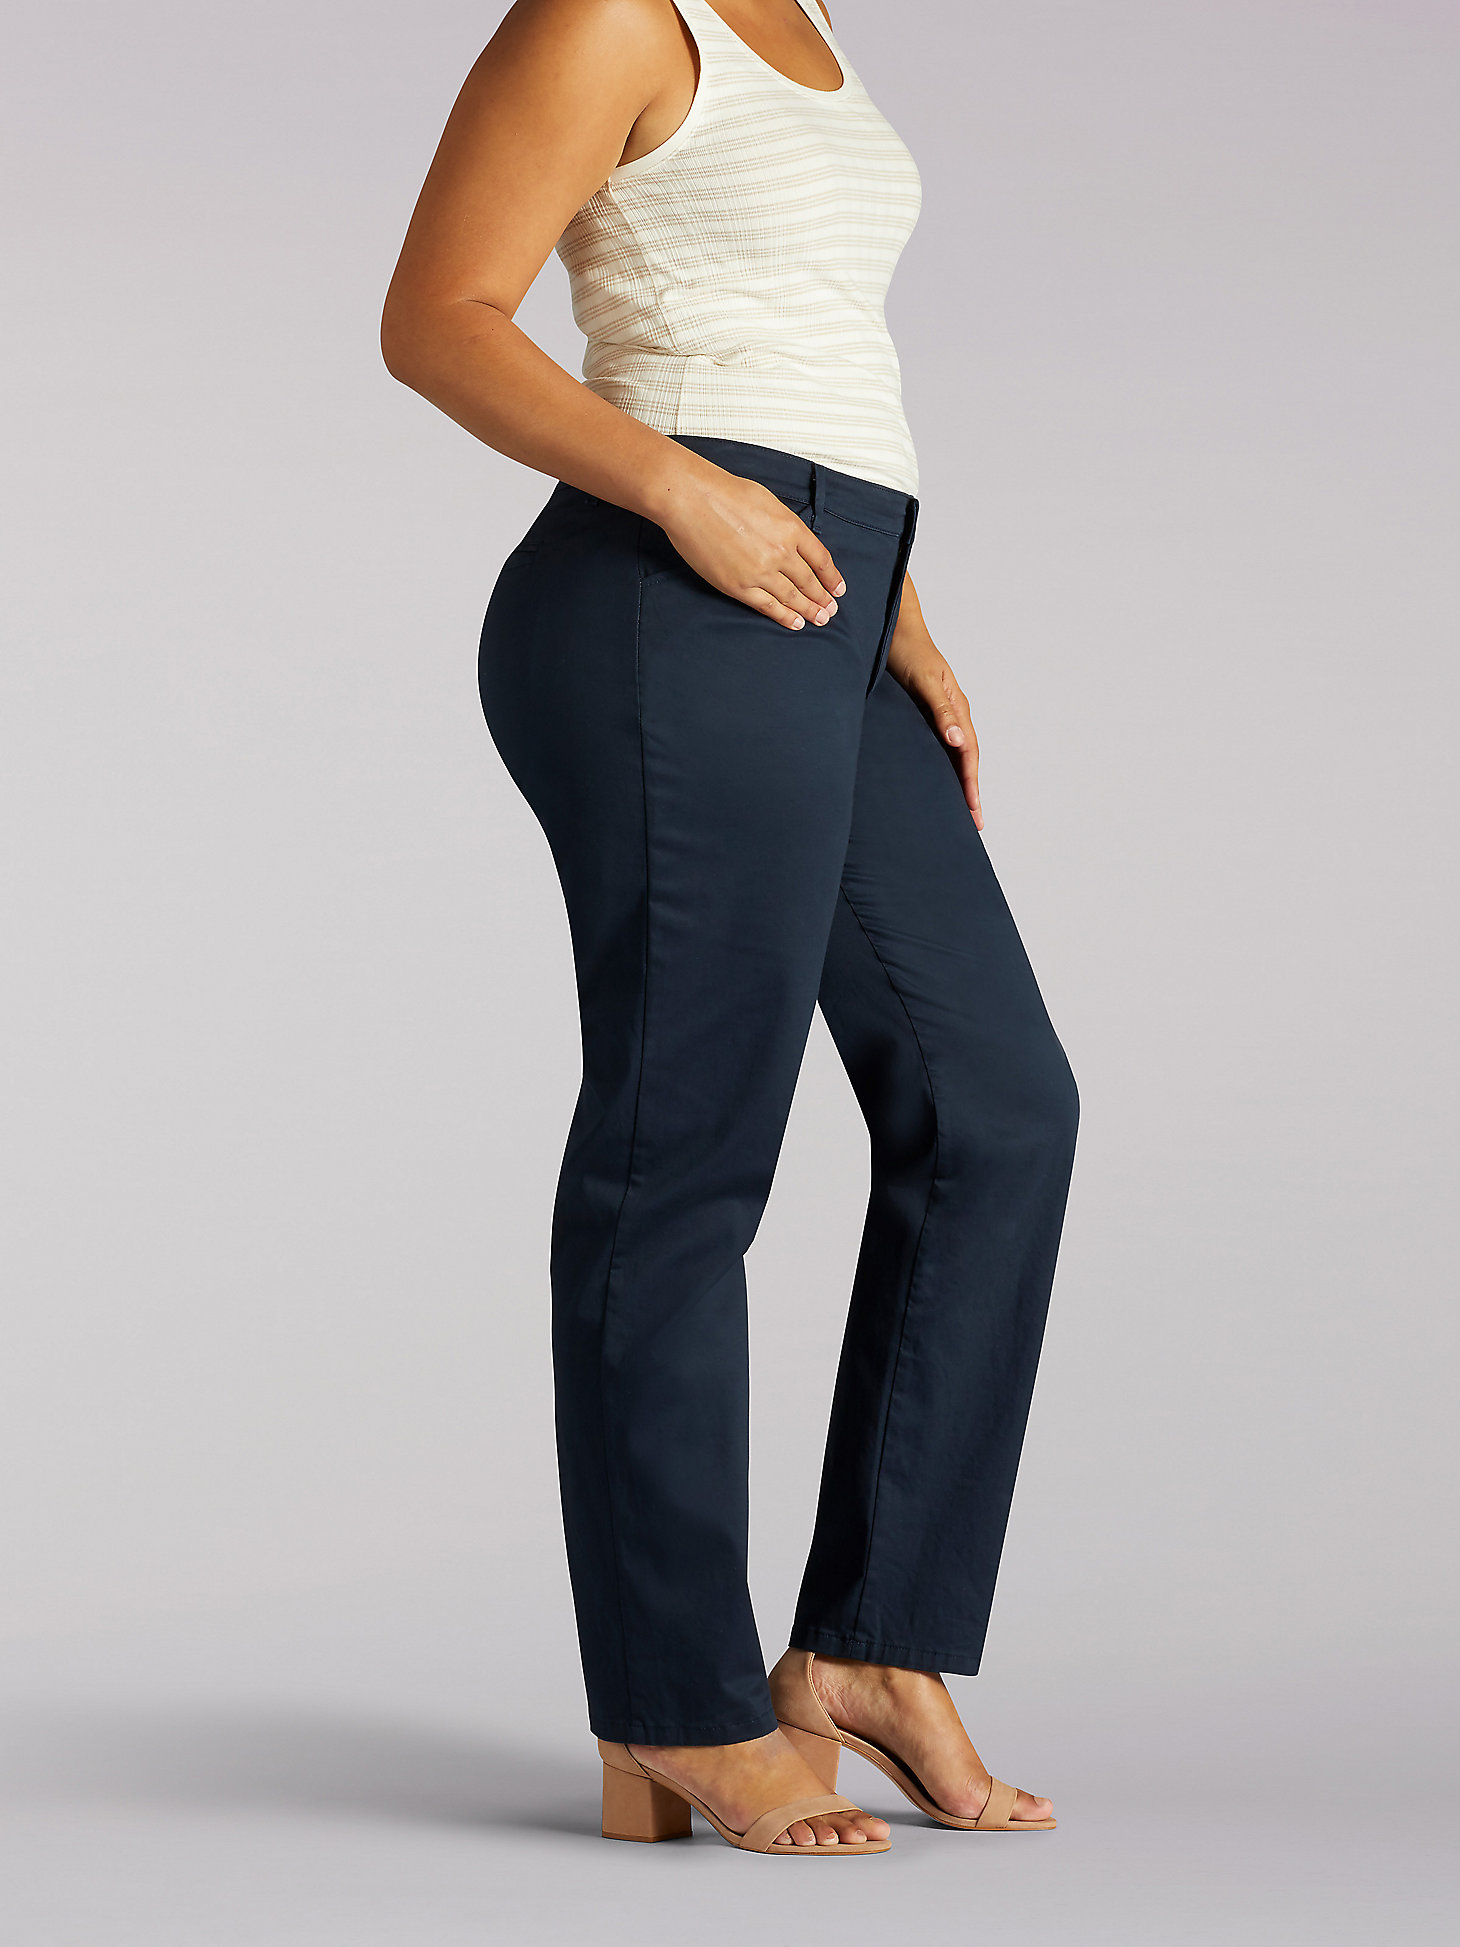 Women’s Relaxed Fit Straight Leg Pant (All Day Pant) (Plus) in Imperial Blue alternative view 2